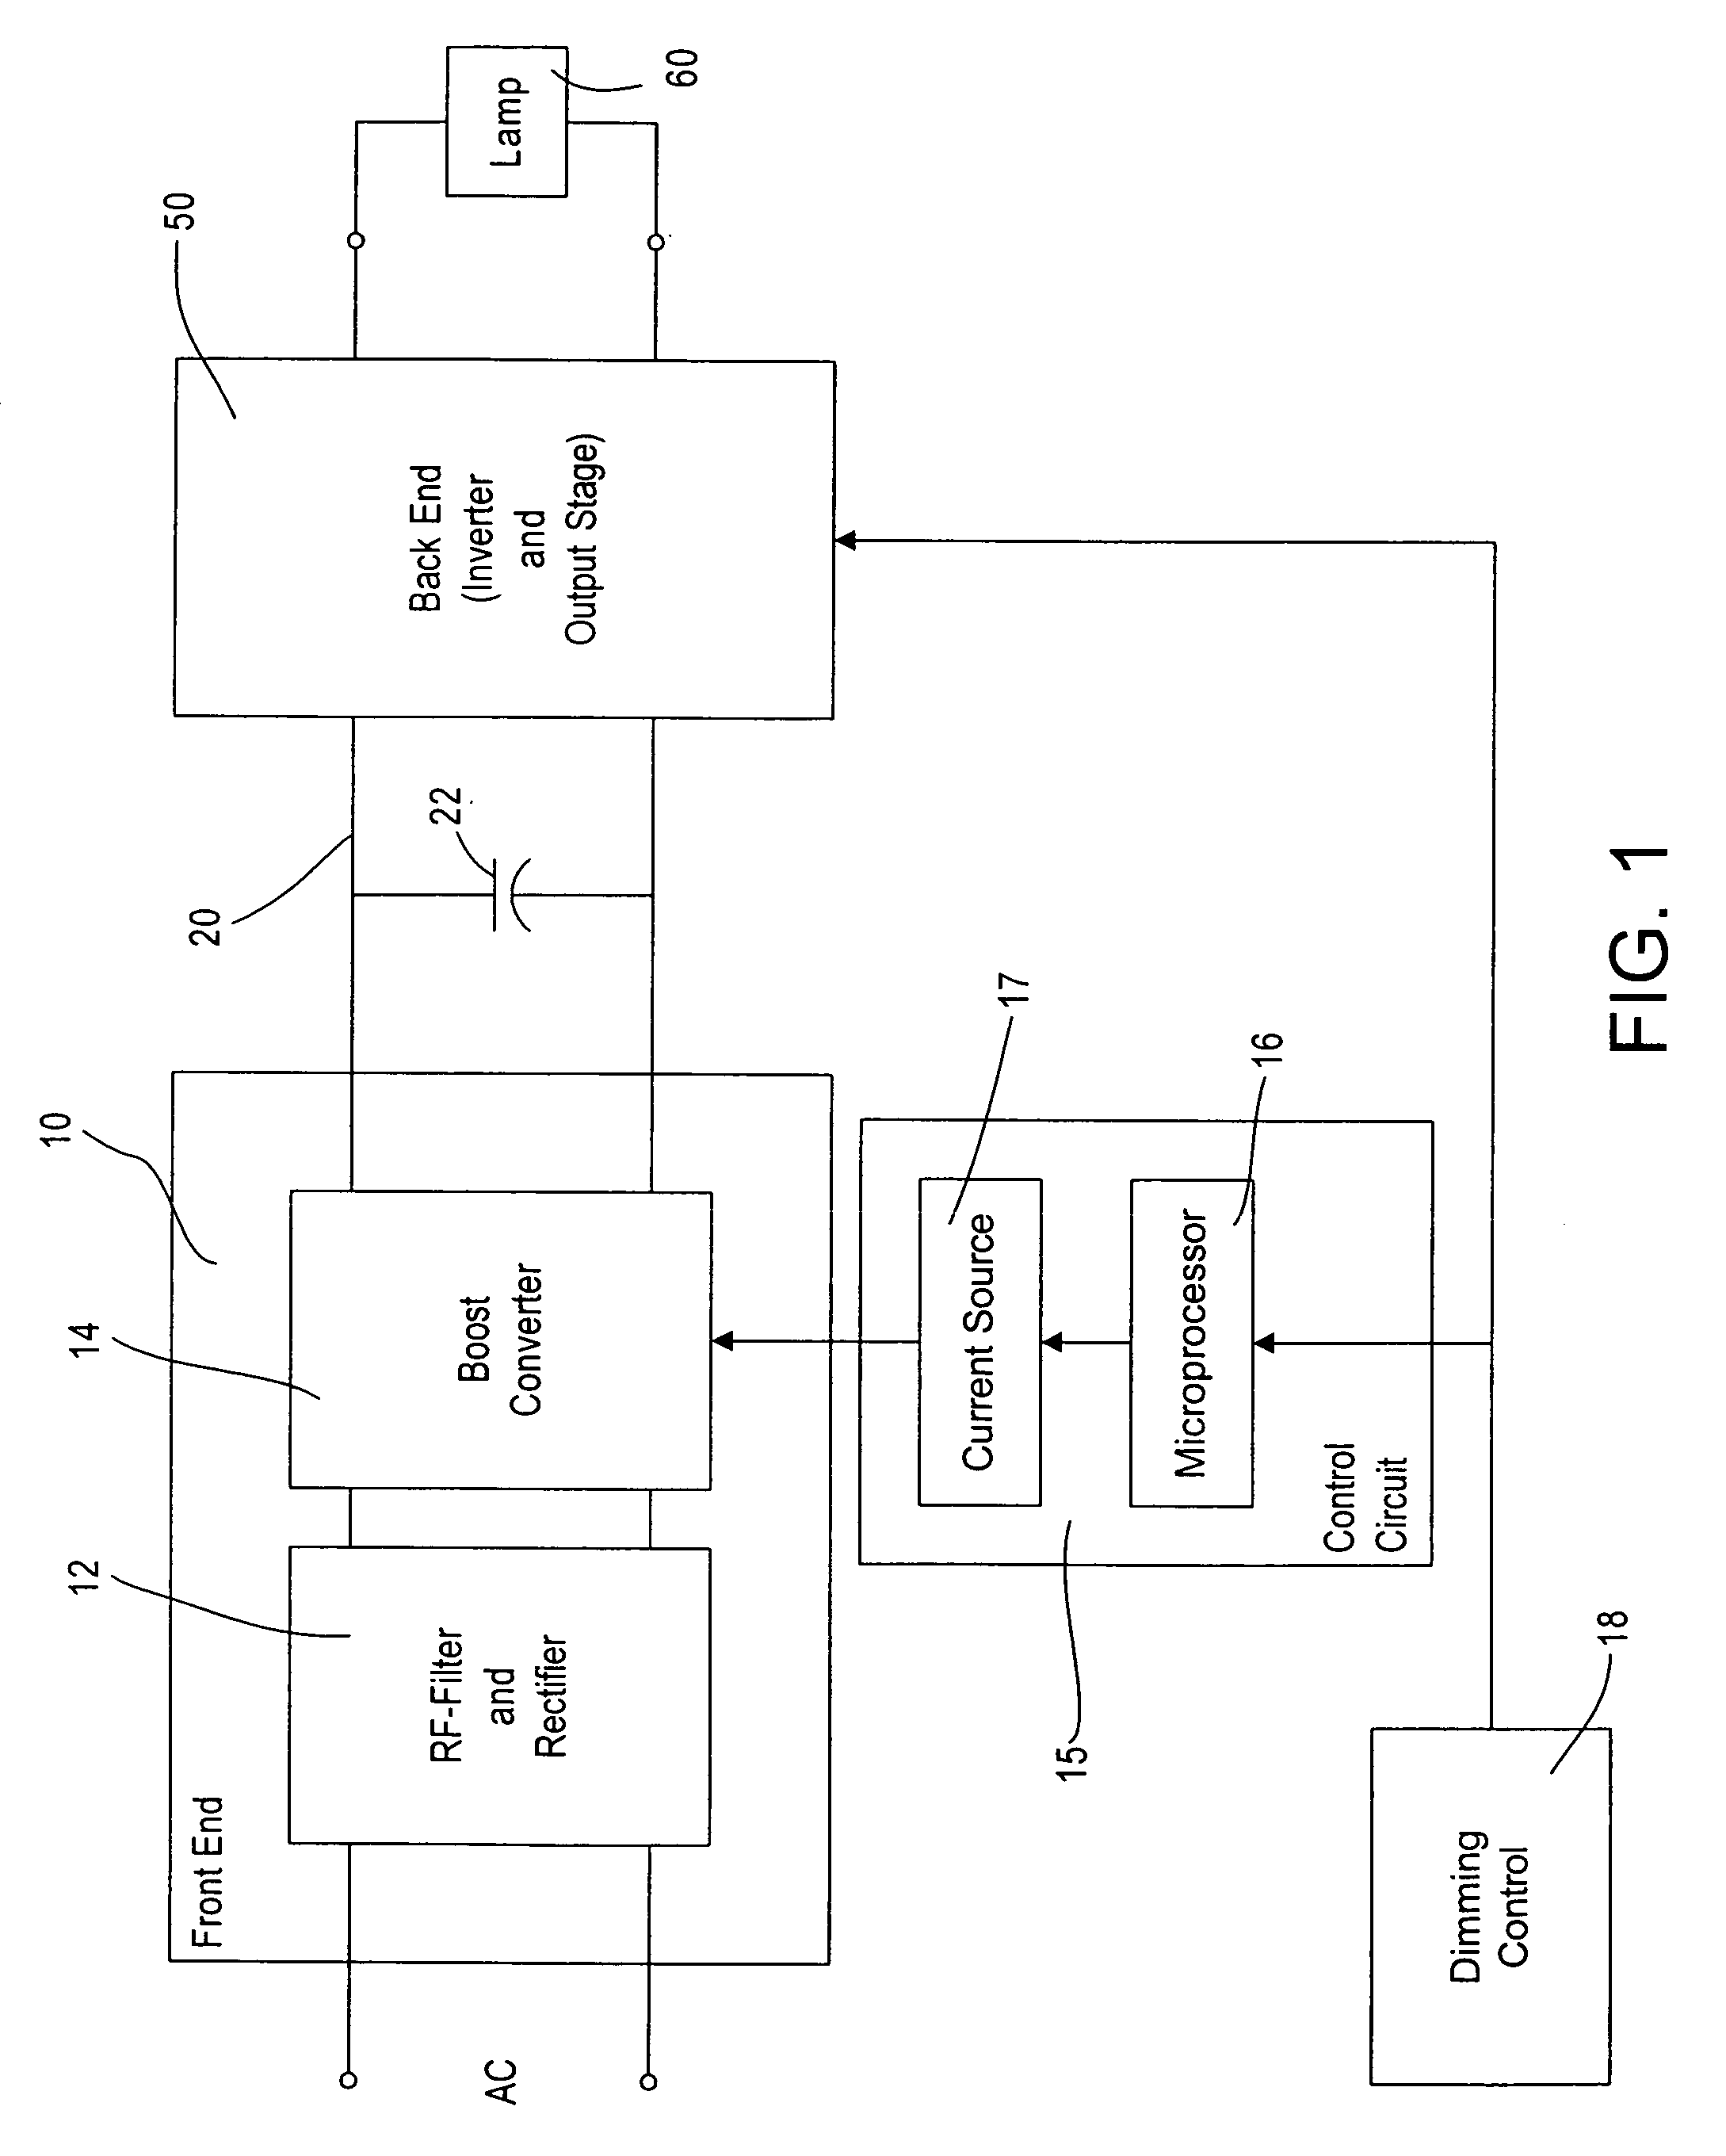 Lighting ballast having boost converter with on/off control and method of ballast operation